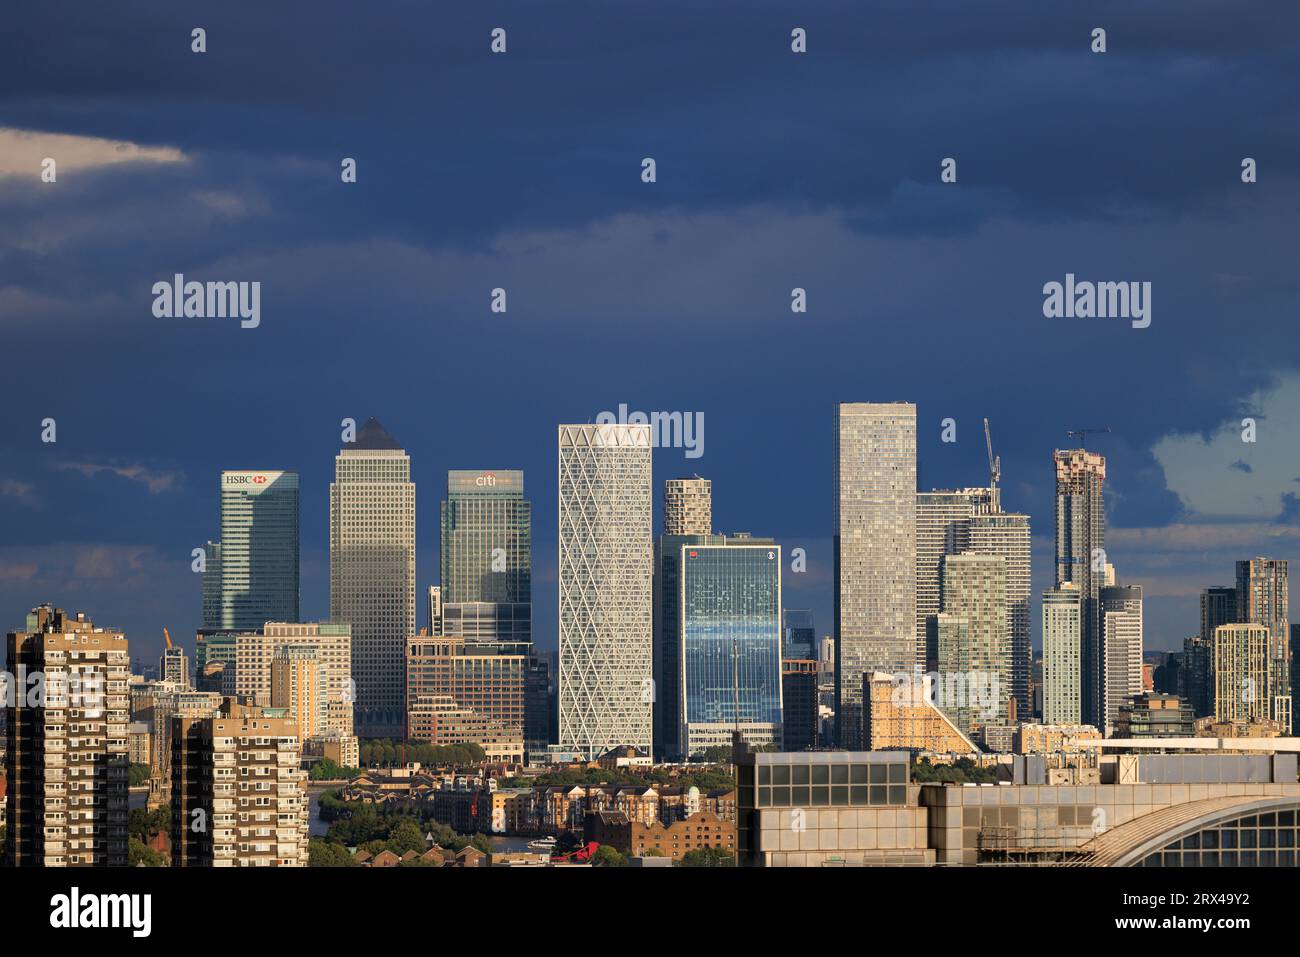 Canary Wharf and docklands development as seen from the City of London. Stock Photo